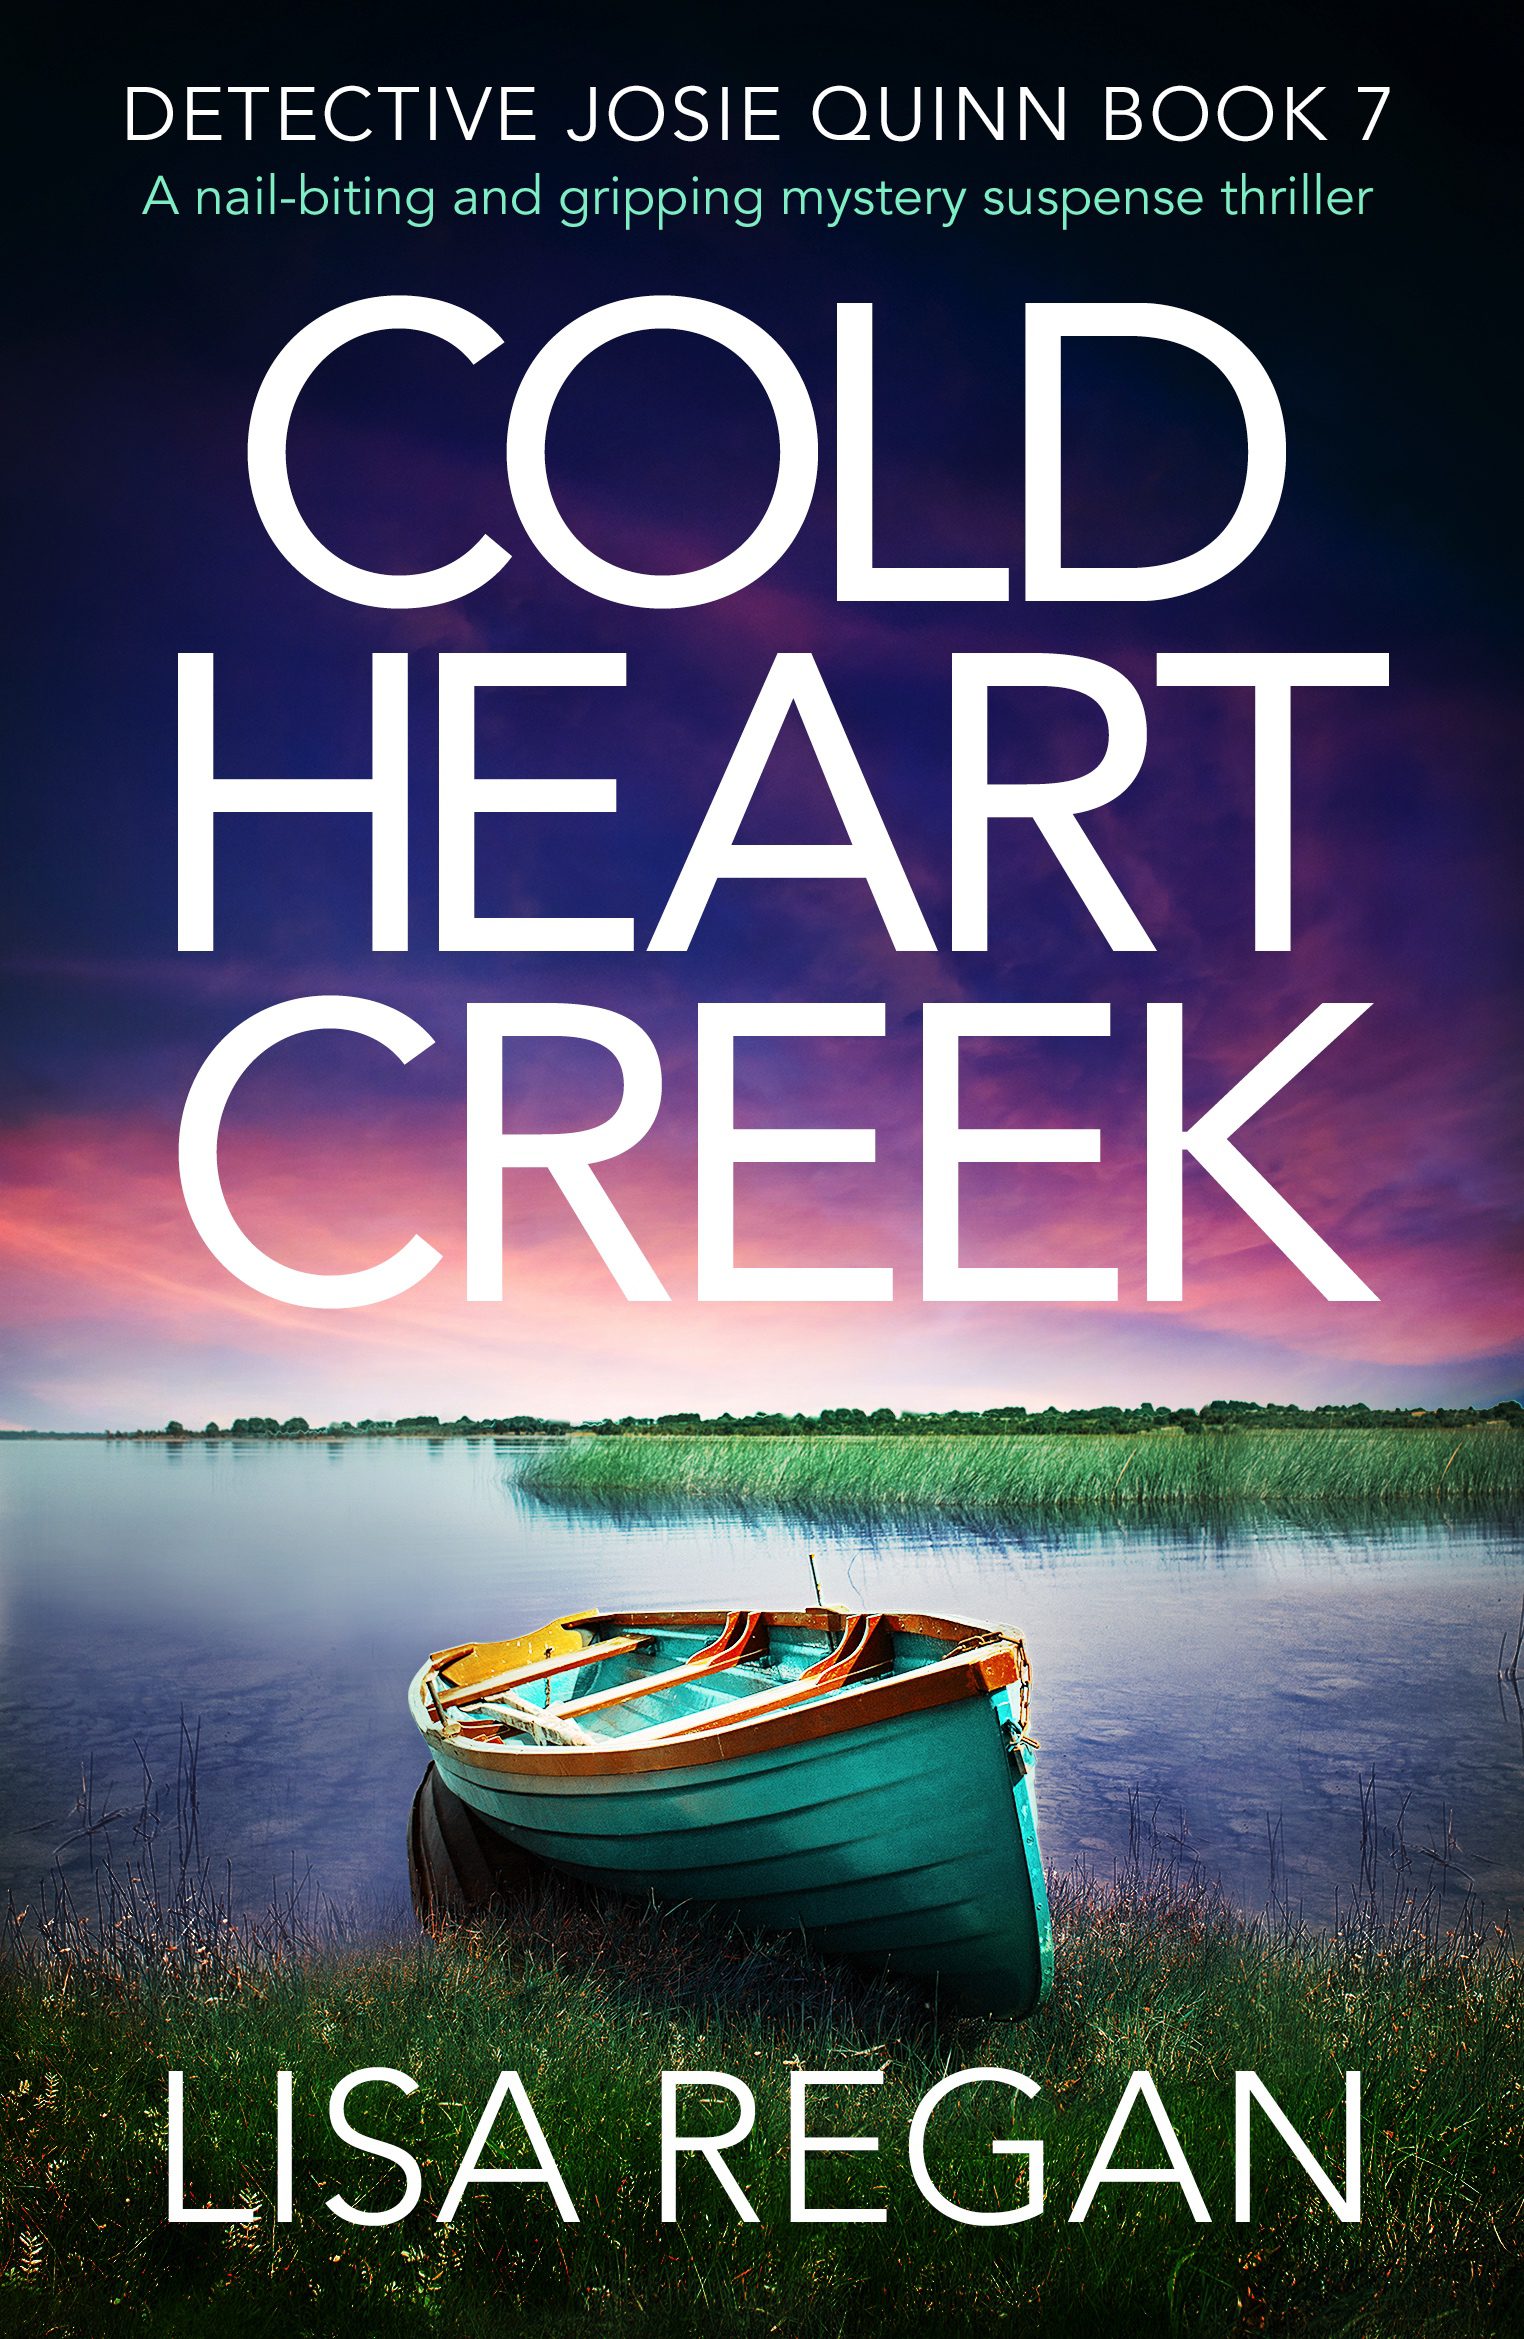 Cold Heart Creek book cover